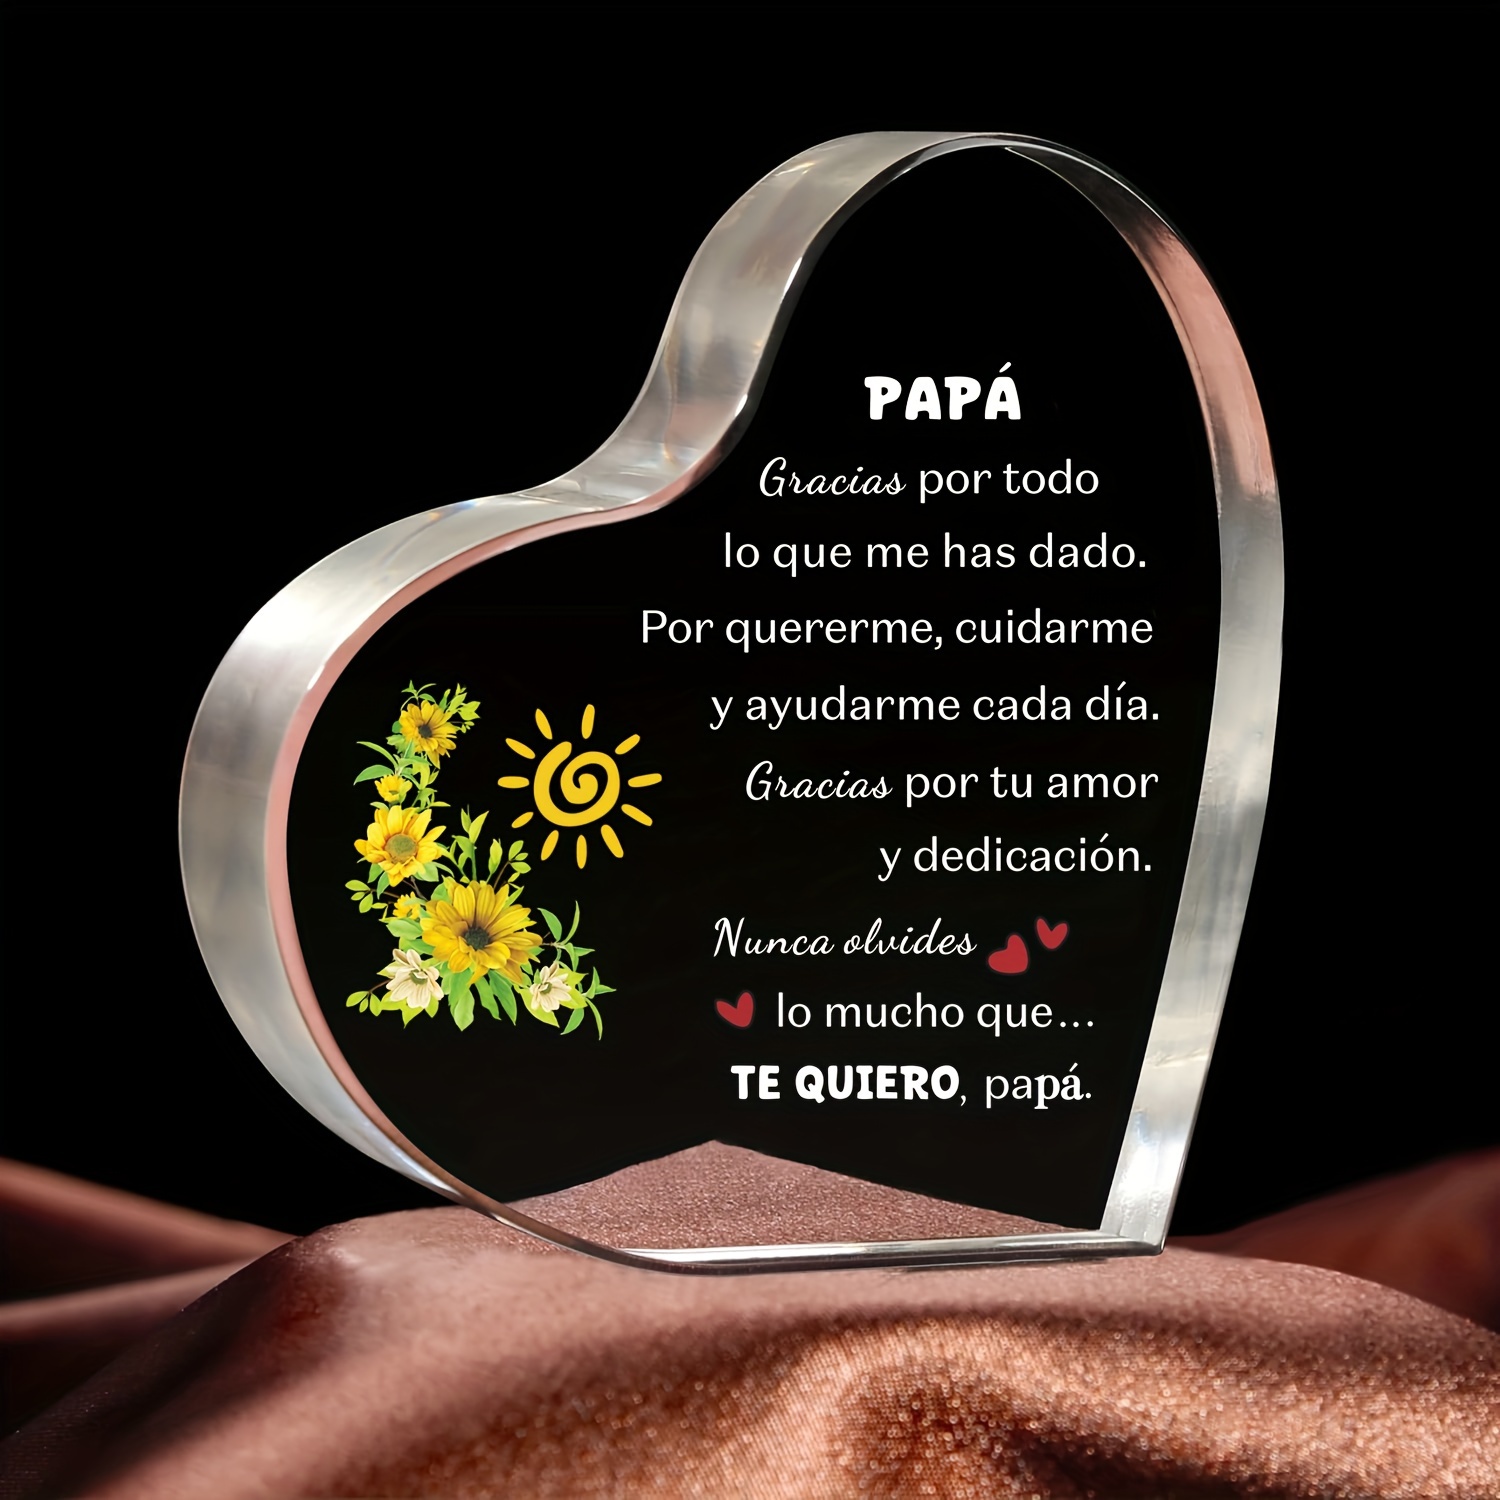 

1pc, Spanish Dad Heart Acrylic Plaque Ornaments Men Father's Day Gifts Desk Sign Sunflowers Home Decor Retirement Appreciate Keepsake Dad, Paperweight Keepsake